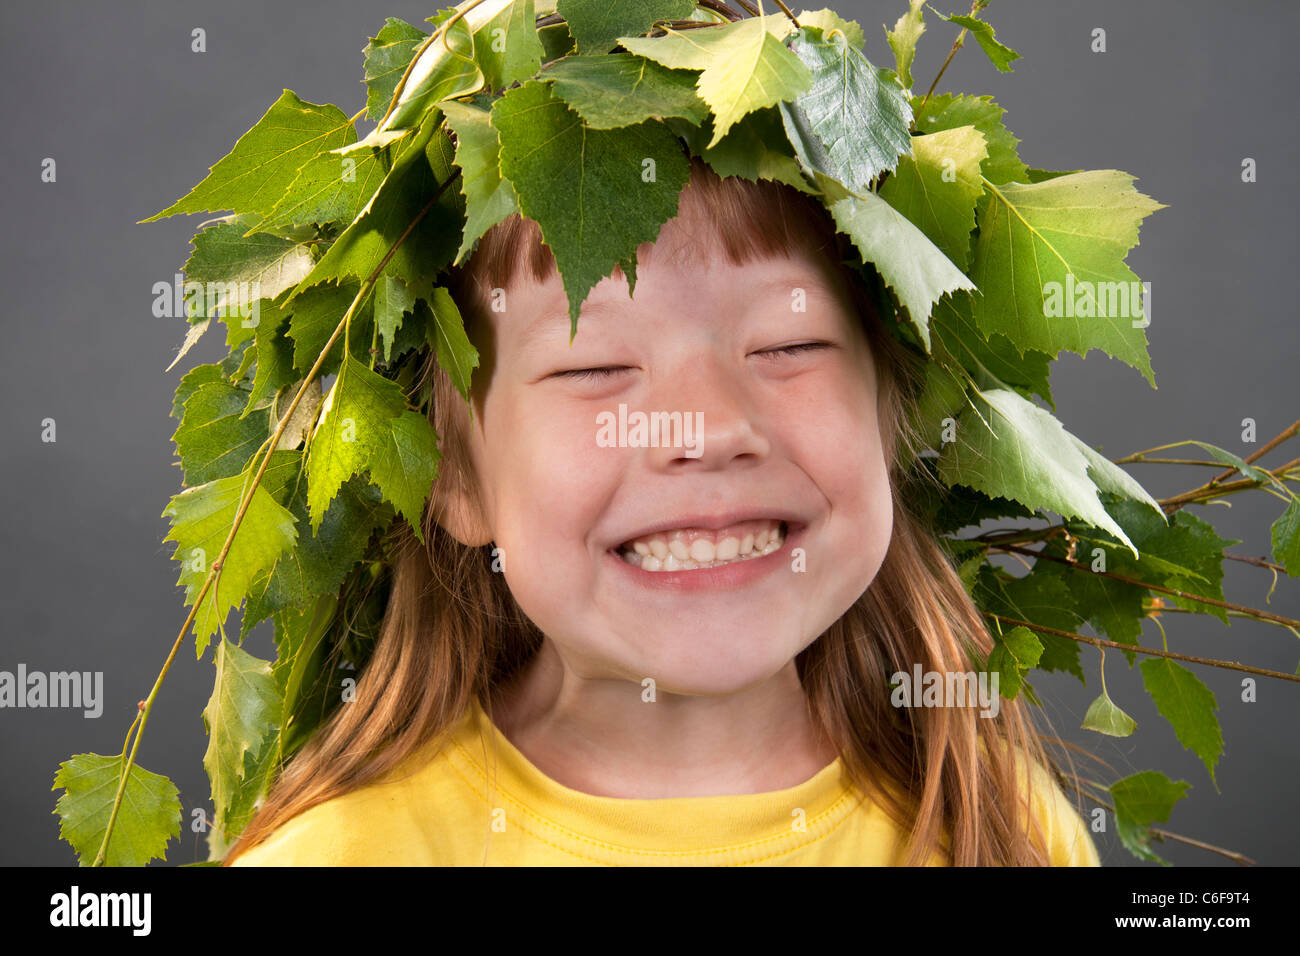 Cheerful little girl with a wreath on a head from birch leaves on a gray background Stock Photo